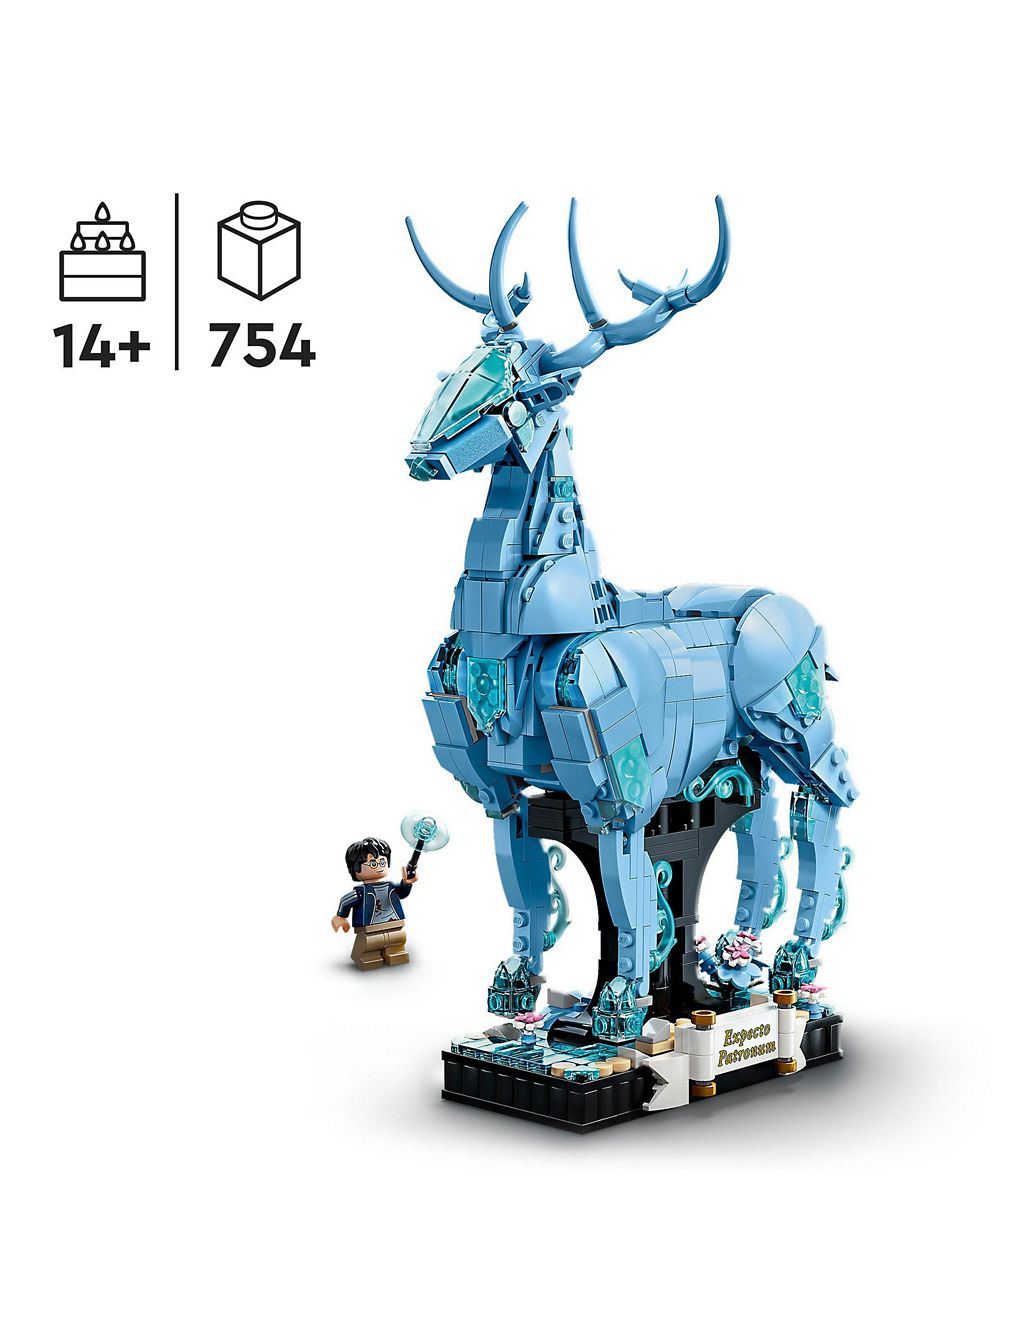 LEGO Harry Potter Expecto Patronum 2-in-1 Set 76414 (14+ Yrs) 1 of 6